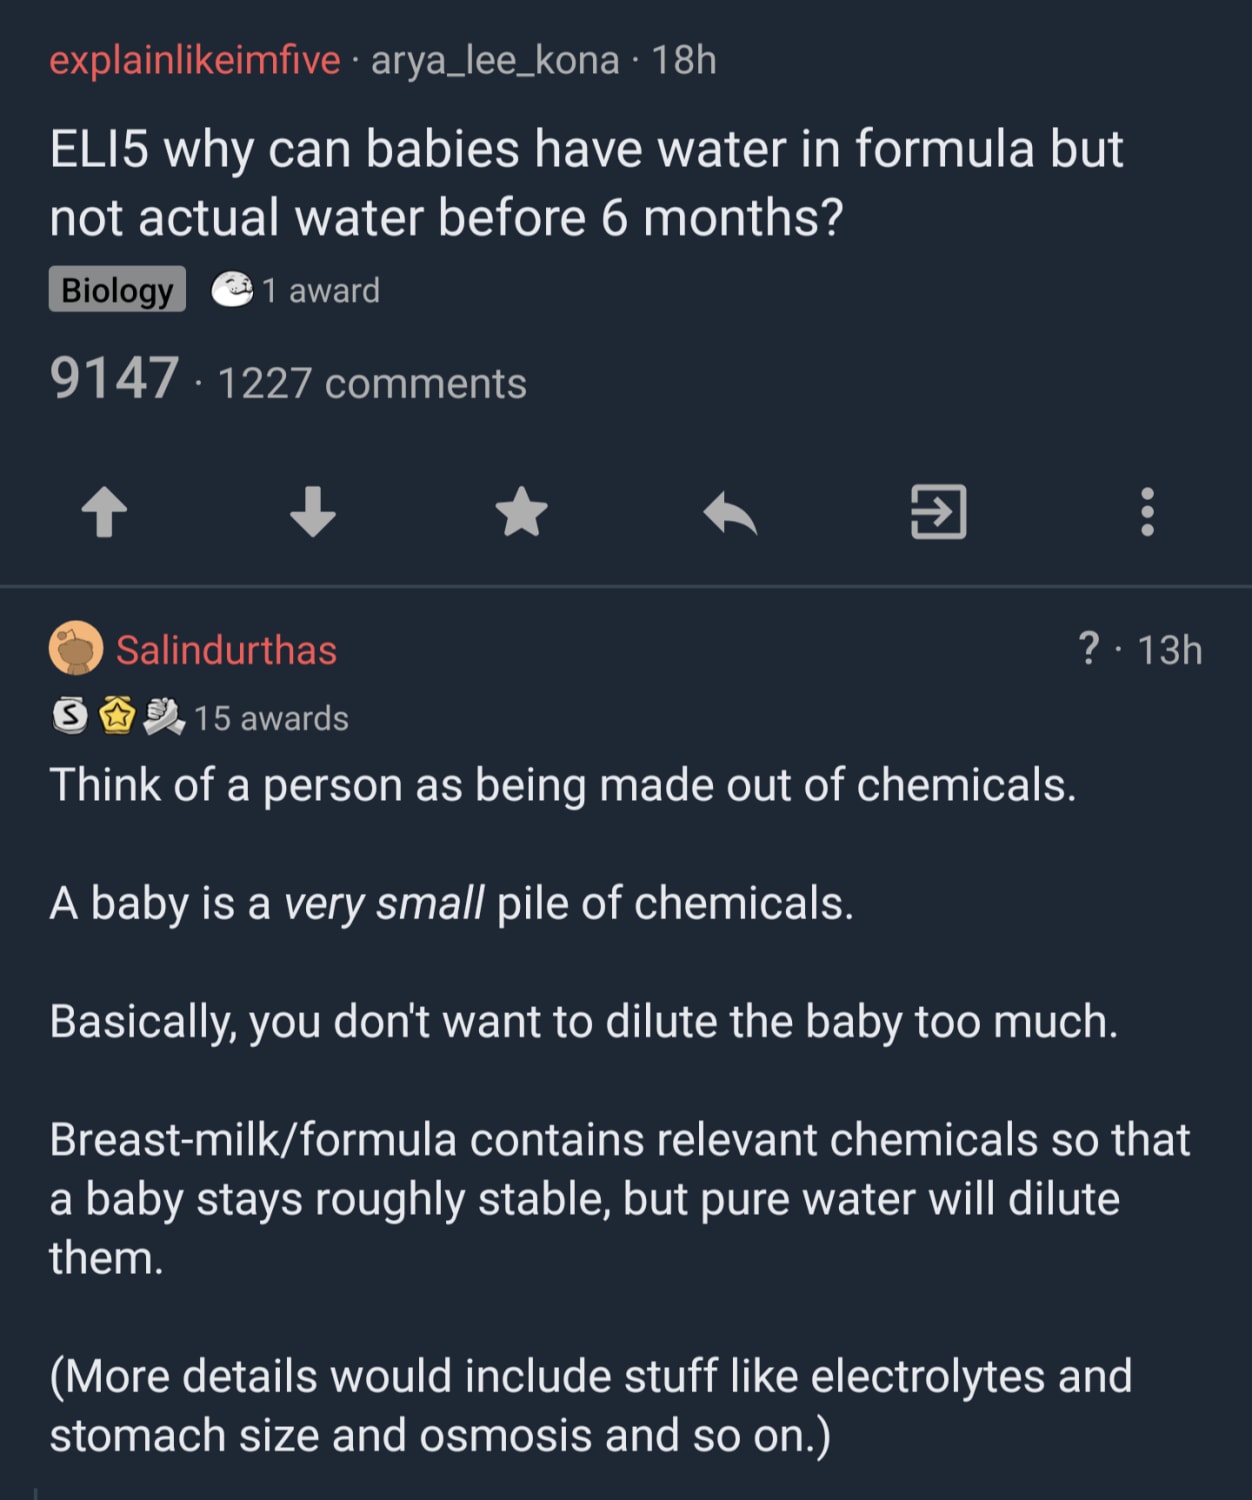 "Basically, you don't want to dilute the baby too much."